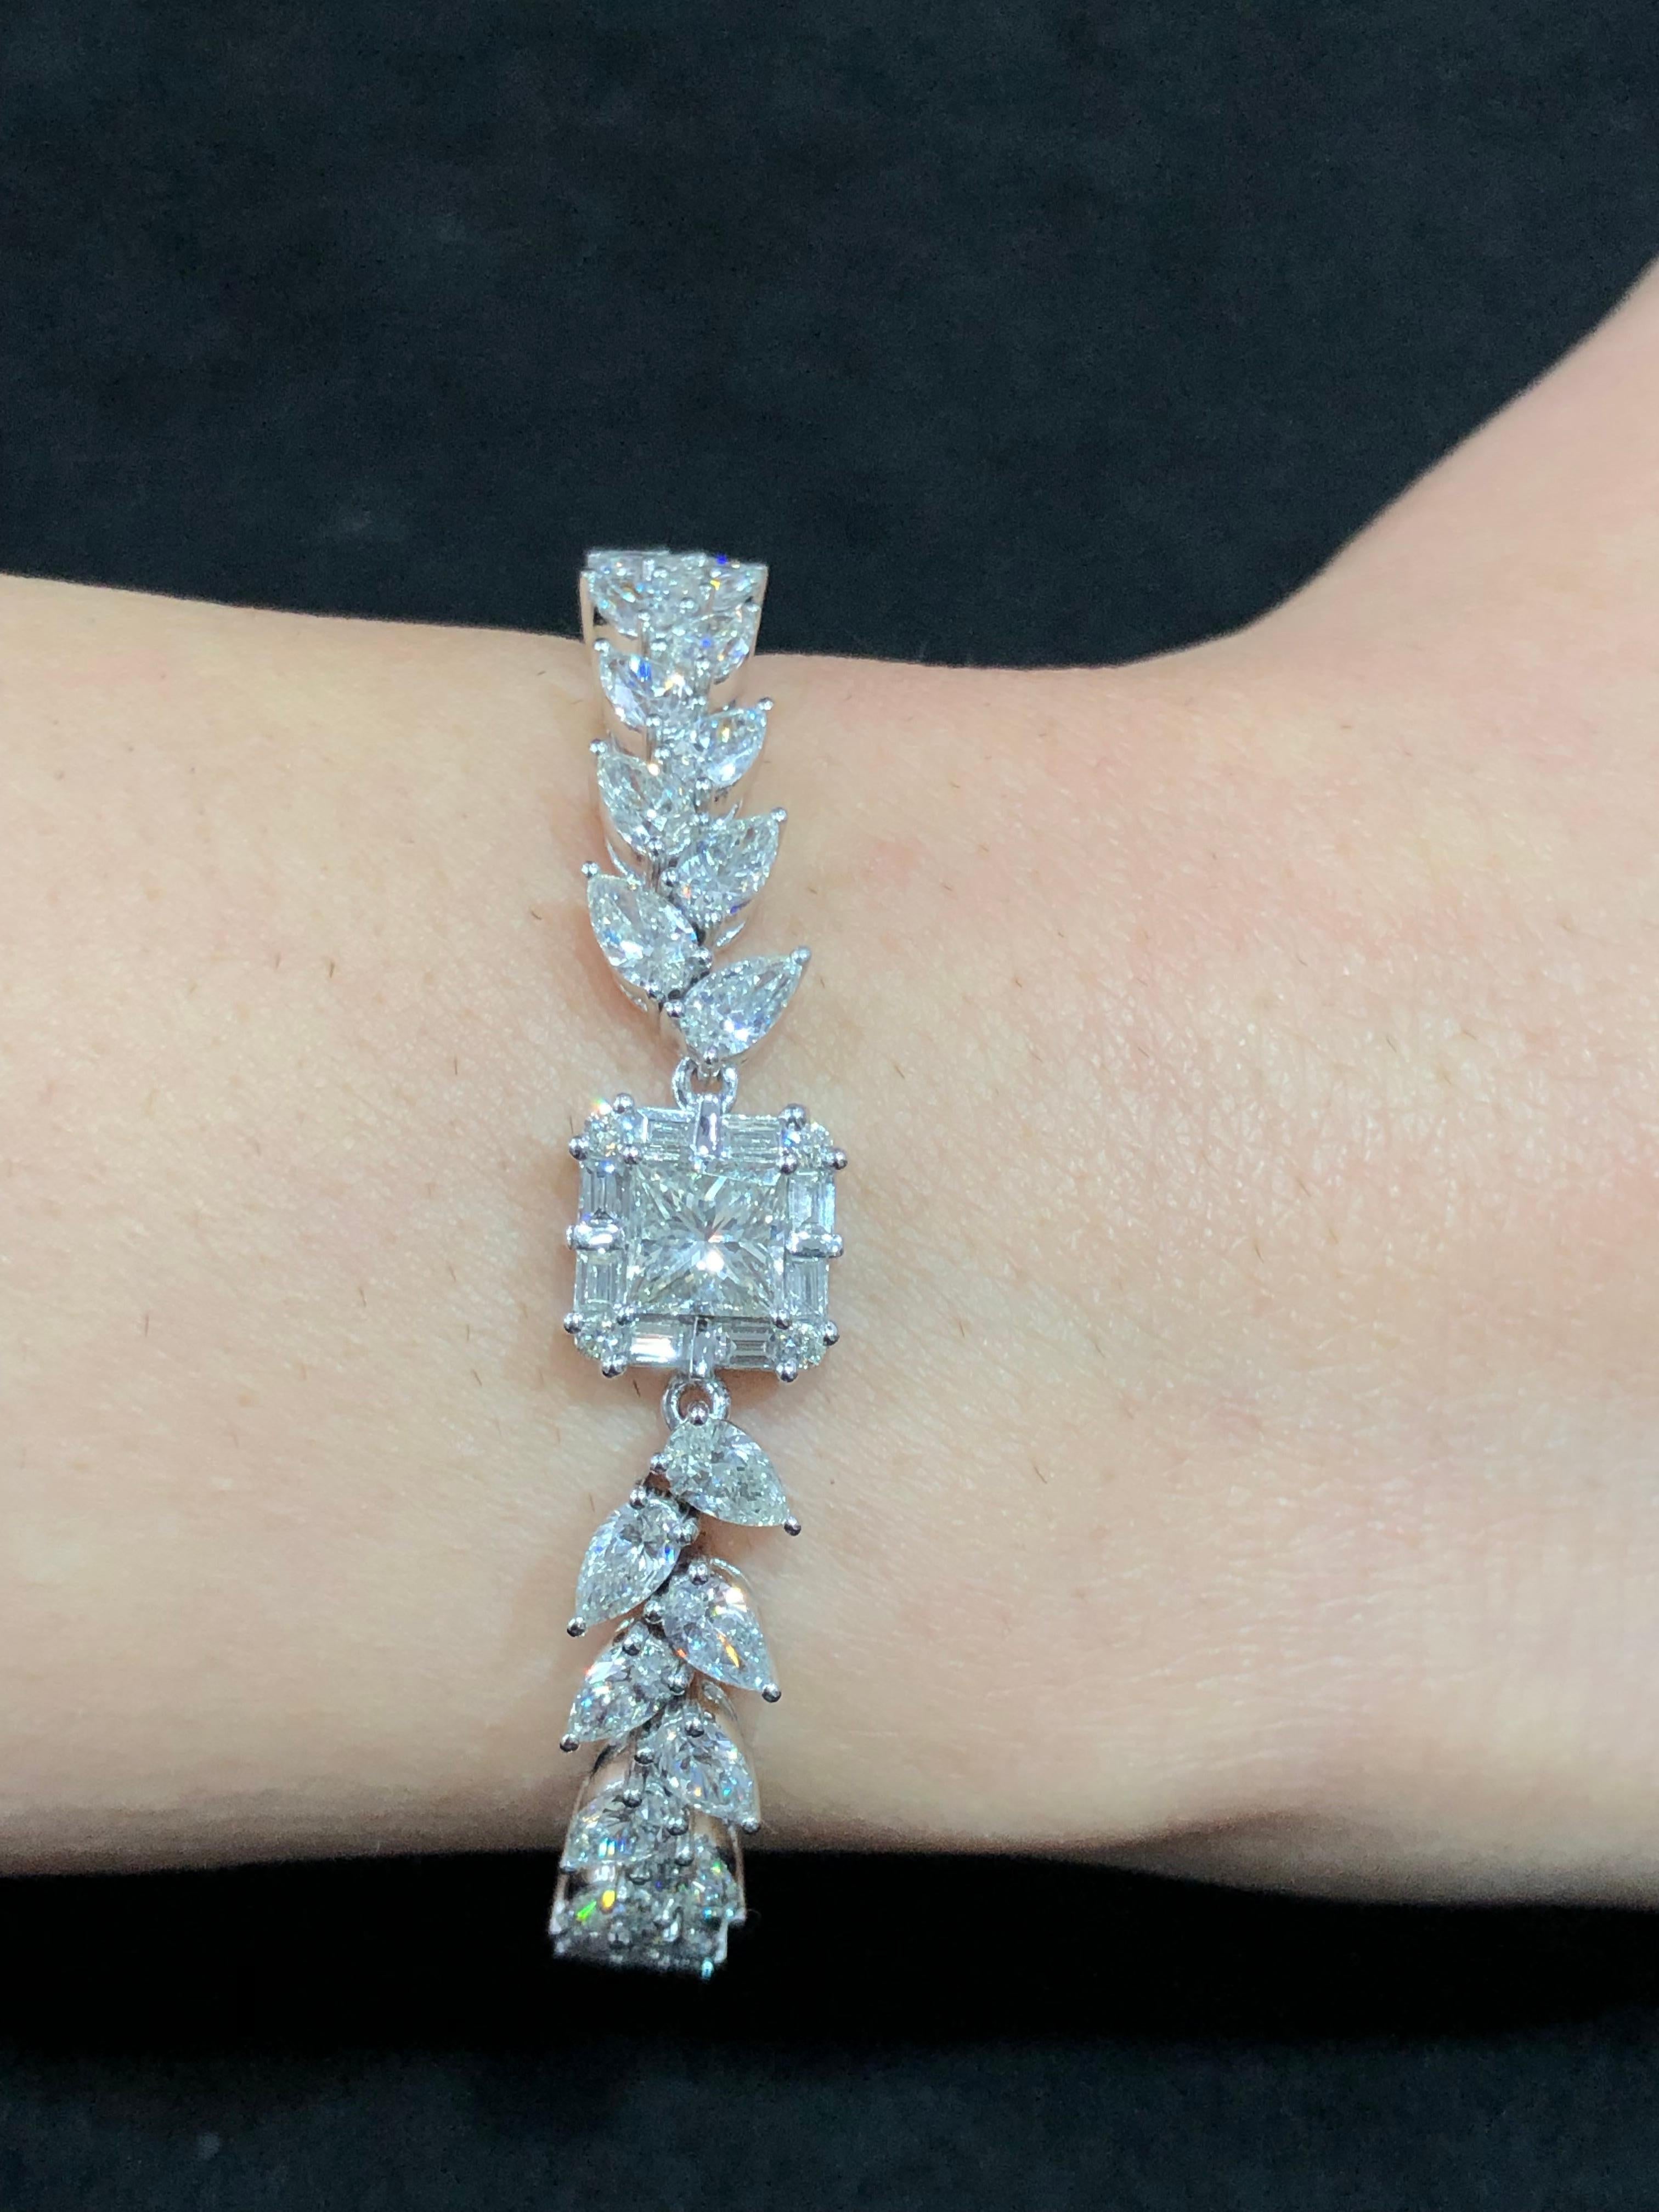 Diamond: 10.07 carat
18kt Gold: 20.906 grams
Ref No: DBR-CFC
Note: This piece is only available on order and can be made according to the wrist size 
Simplicity is the ultimate sophistication! Add this versatile diamond bracelet to your jewellery